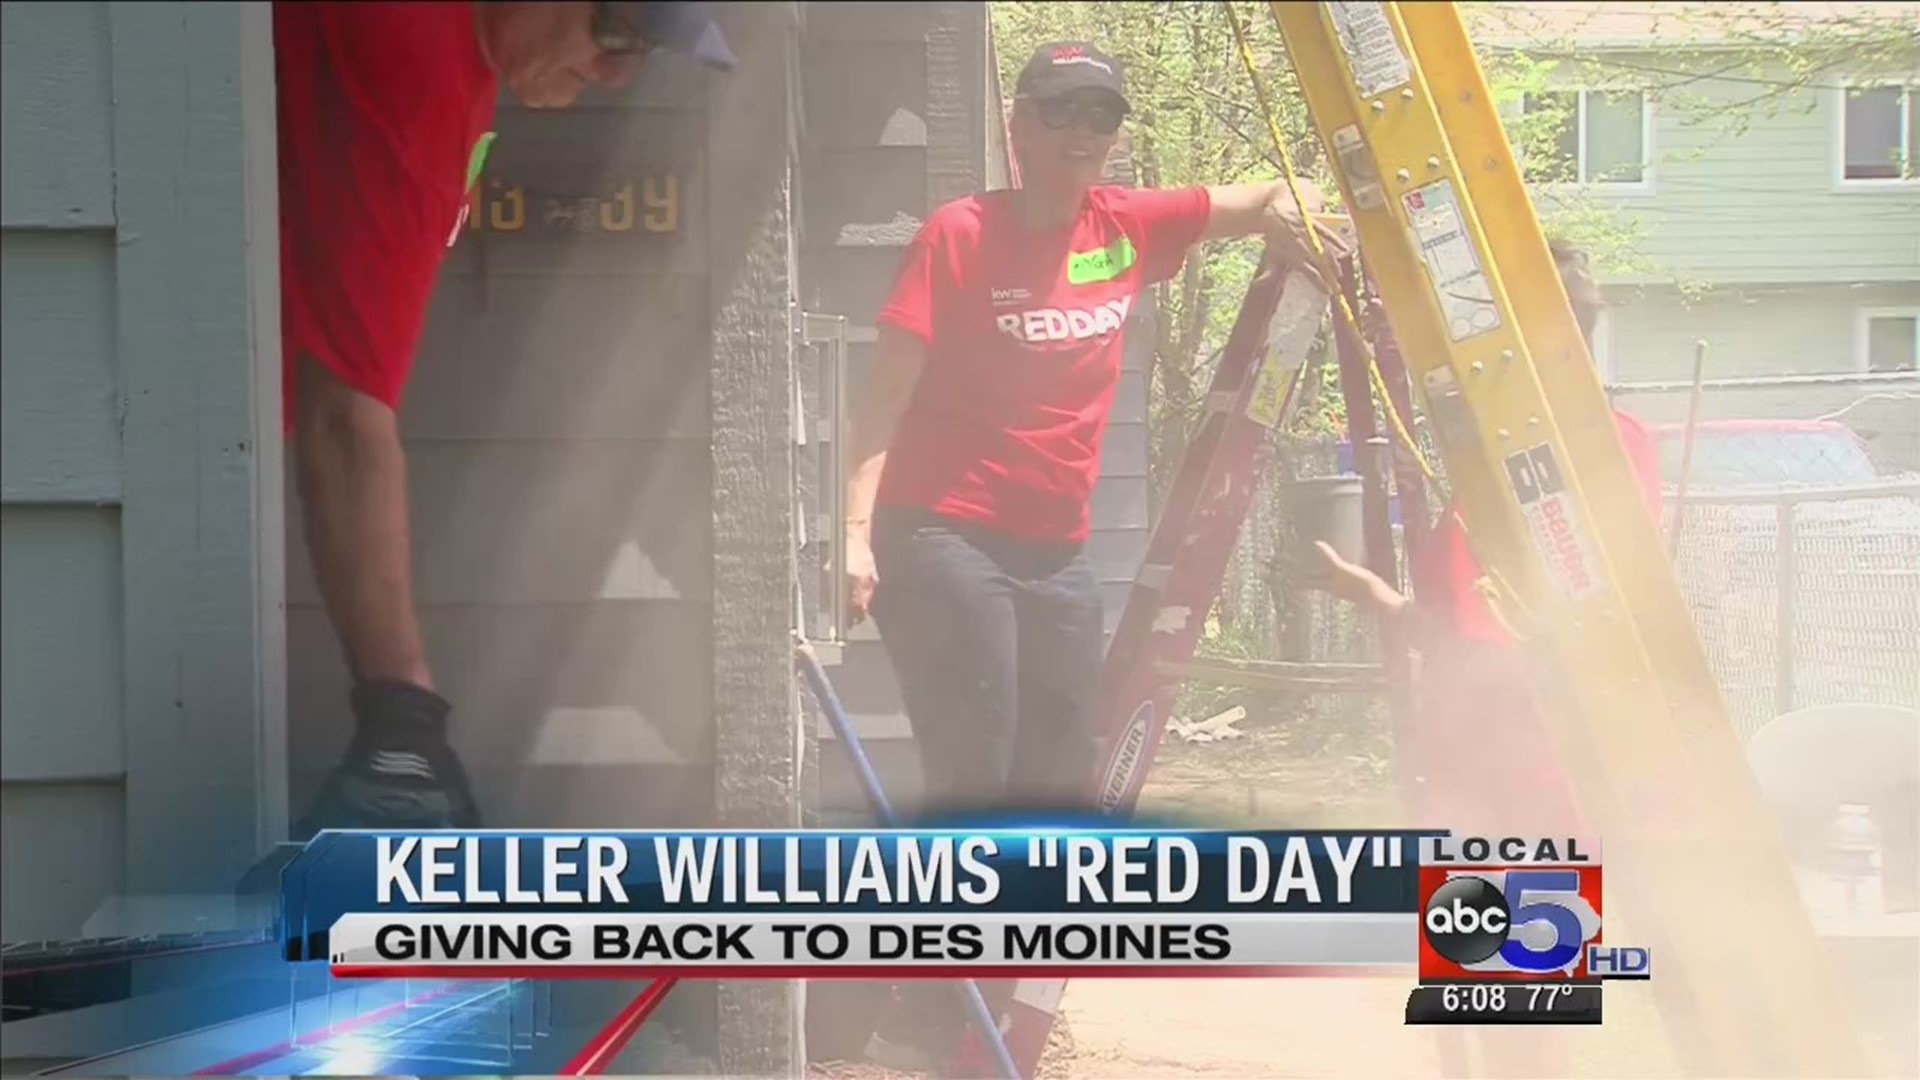 Keller Williams give back through "Red Day"